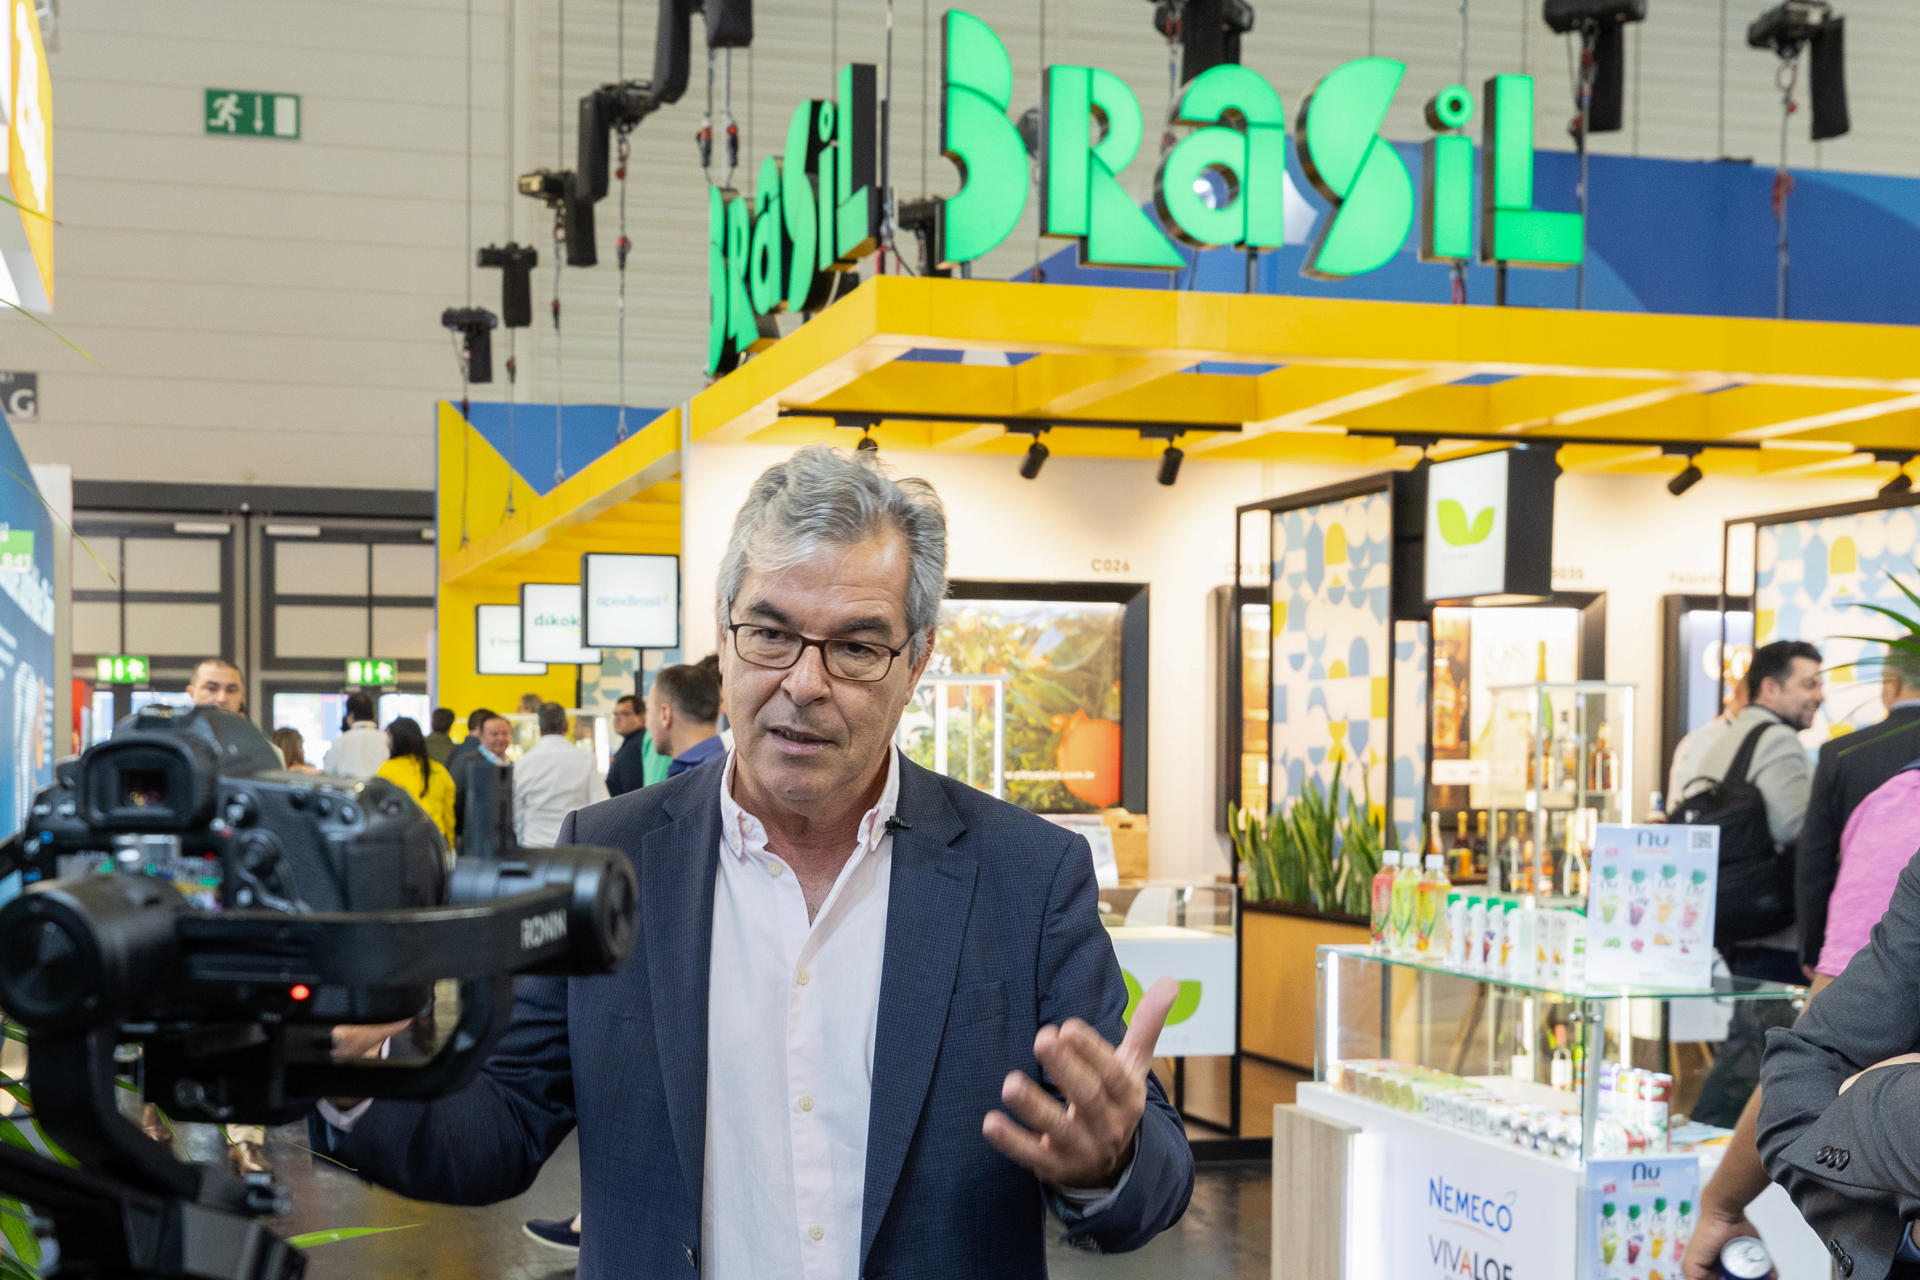 Jorge Viana, the president of ApexBrasil, speaks during his participation in the international food and beverages sector fair, Anuga, between October 7 and October 11, 2023, in Cologne (Germany). EFE/ApexBrasil/EDITORIAL USE ONLY/AVAILABLE ONLY TO ILLUSTRATE THE ACCOMPANYING NEWS STORY (MANDATORY CREDIT)